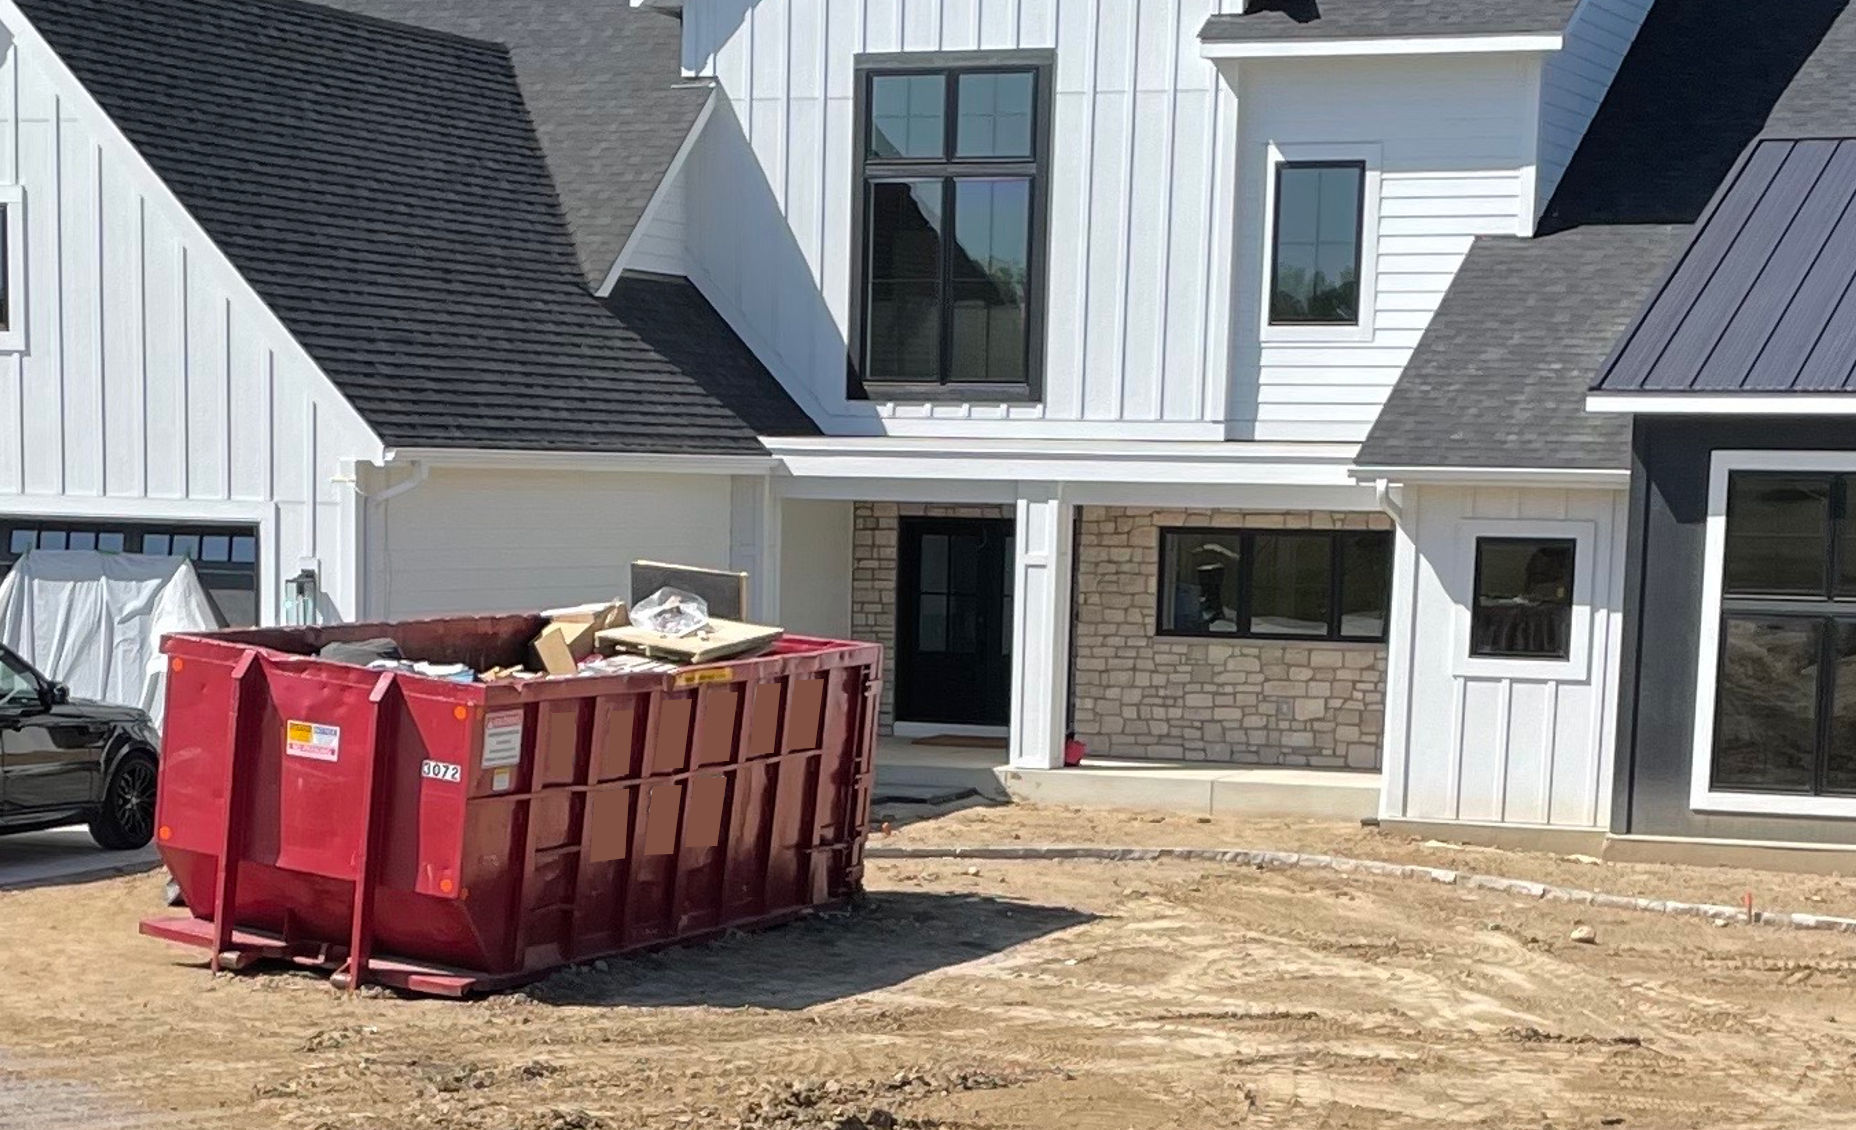 Our larger red dumpsters being used for landscaping in Lakeville MN